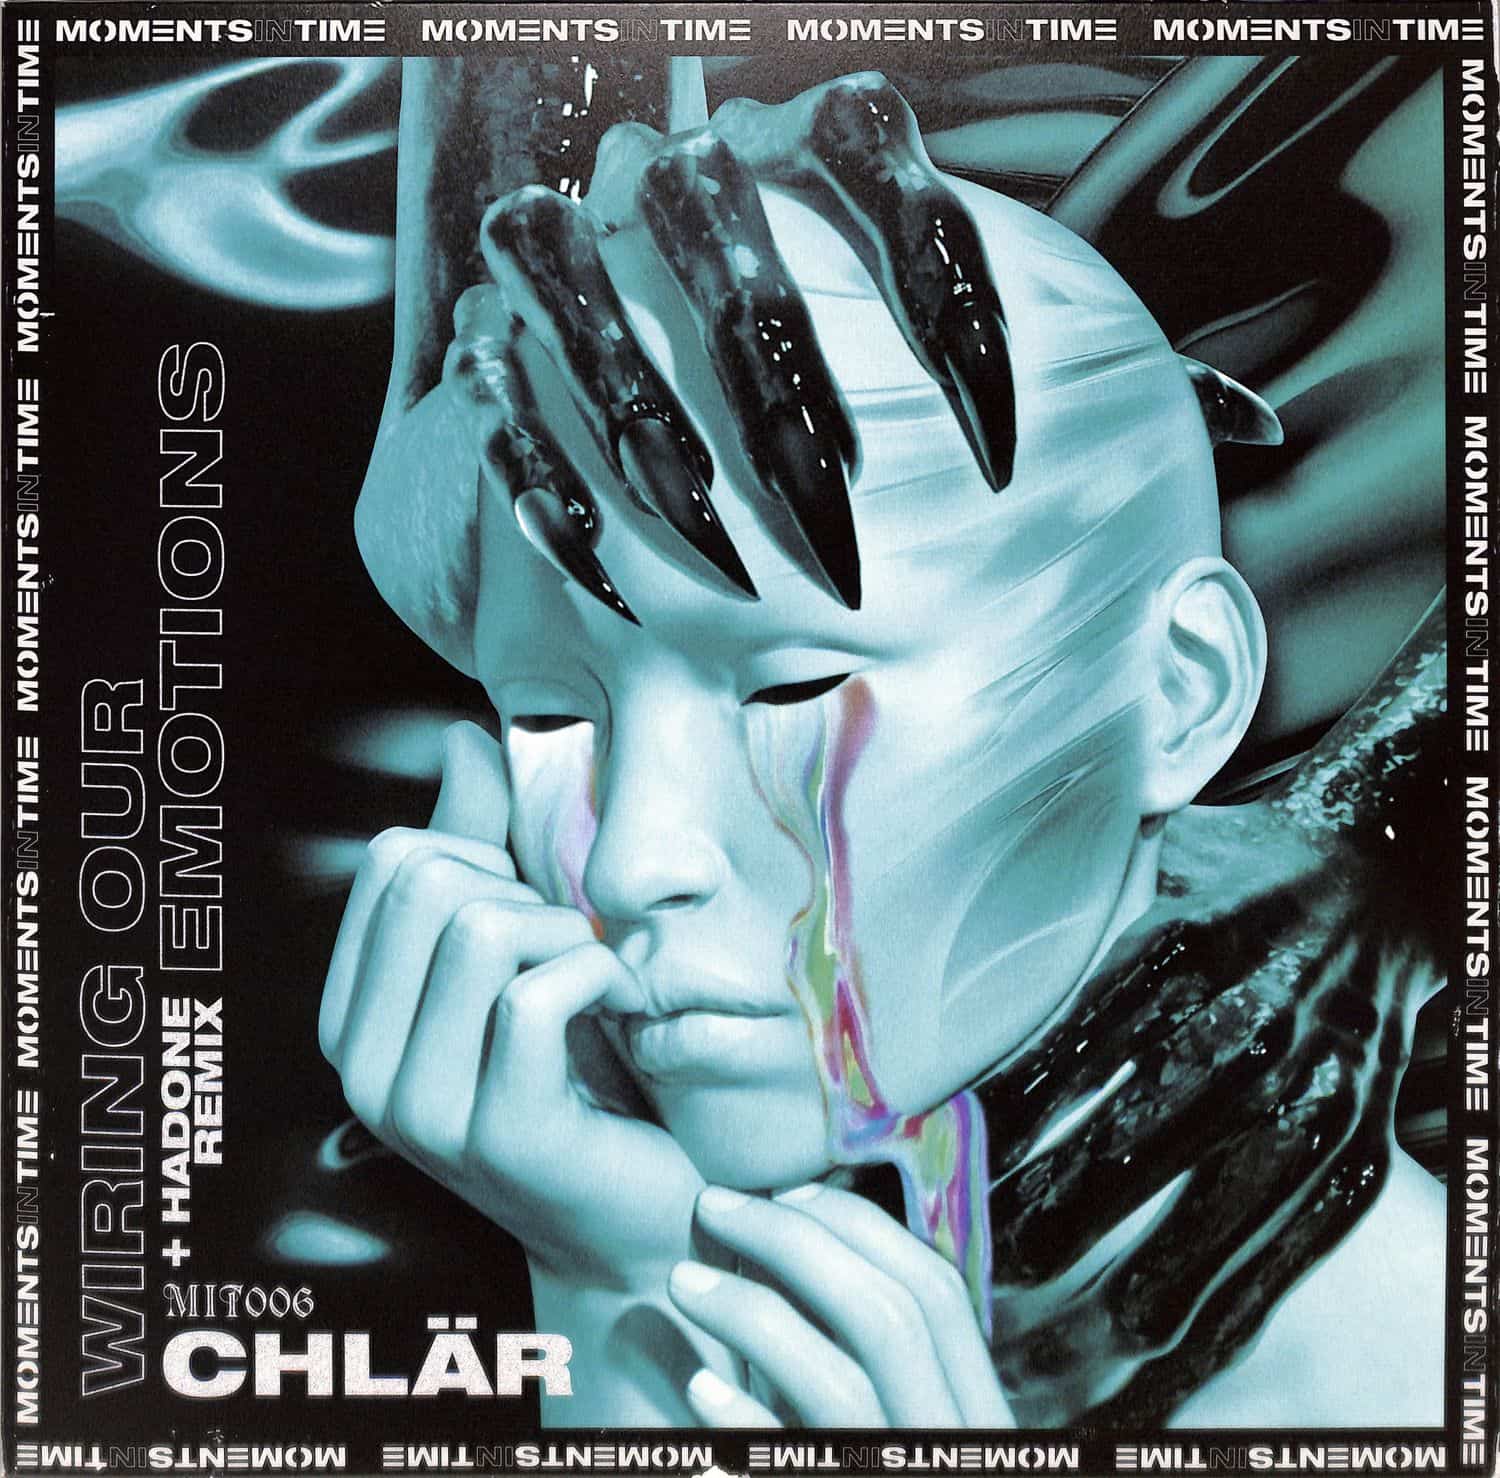 Chlar - WIRING OUR EMOTIONS 